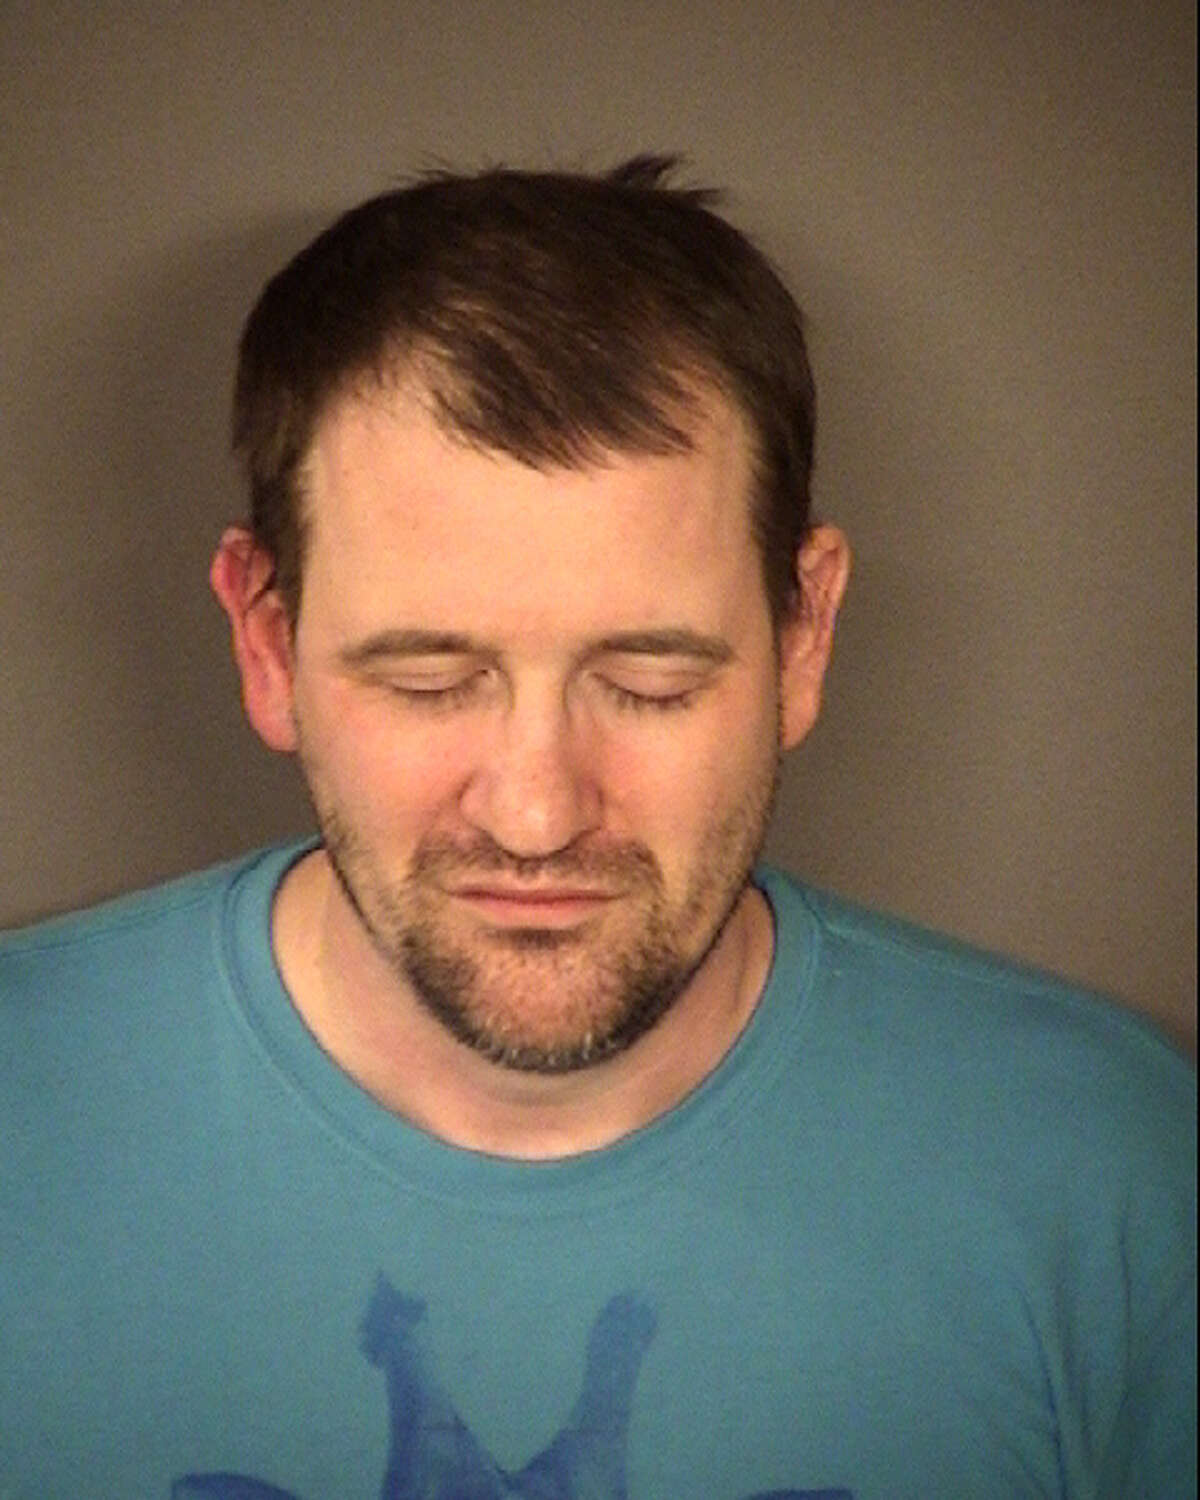 Steven Lyn Deaton of San Antonio's far Northwest Side now faces a charge of continuous sexual abuse of a young child. He remains in the Bexar County Jail on a $75,000 bond.